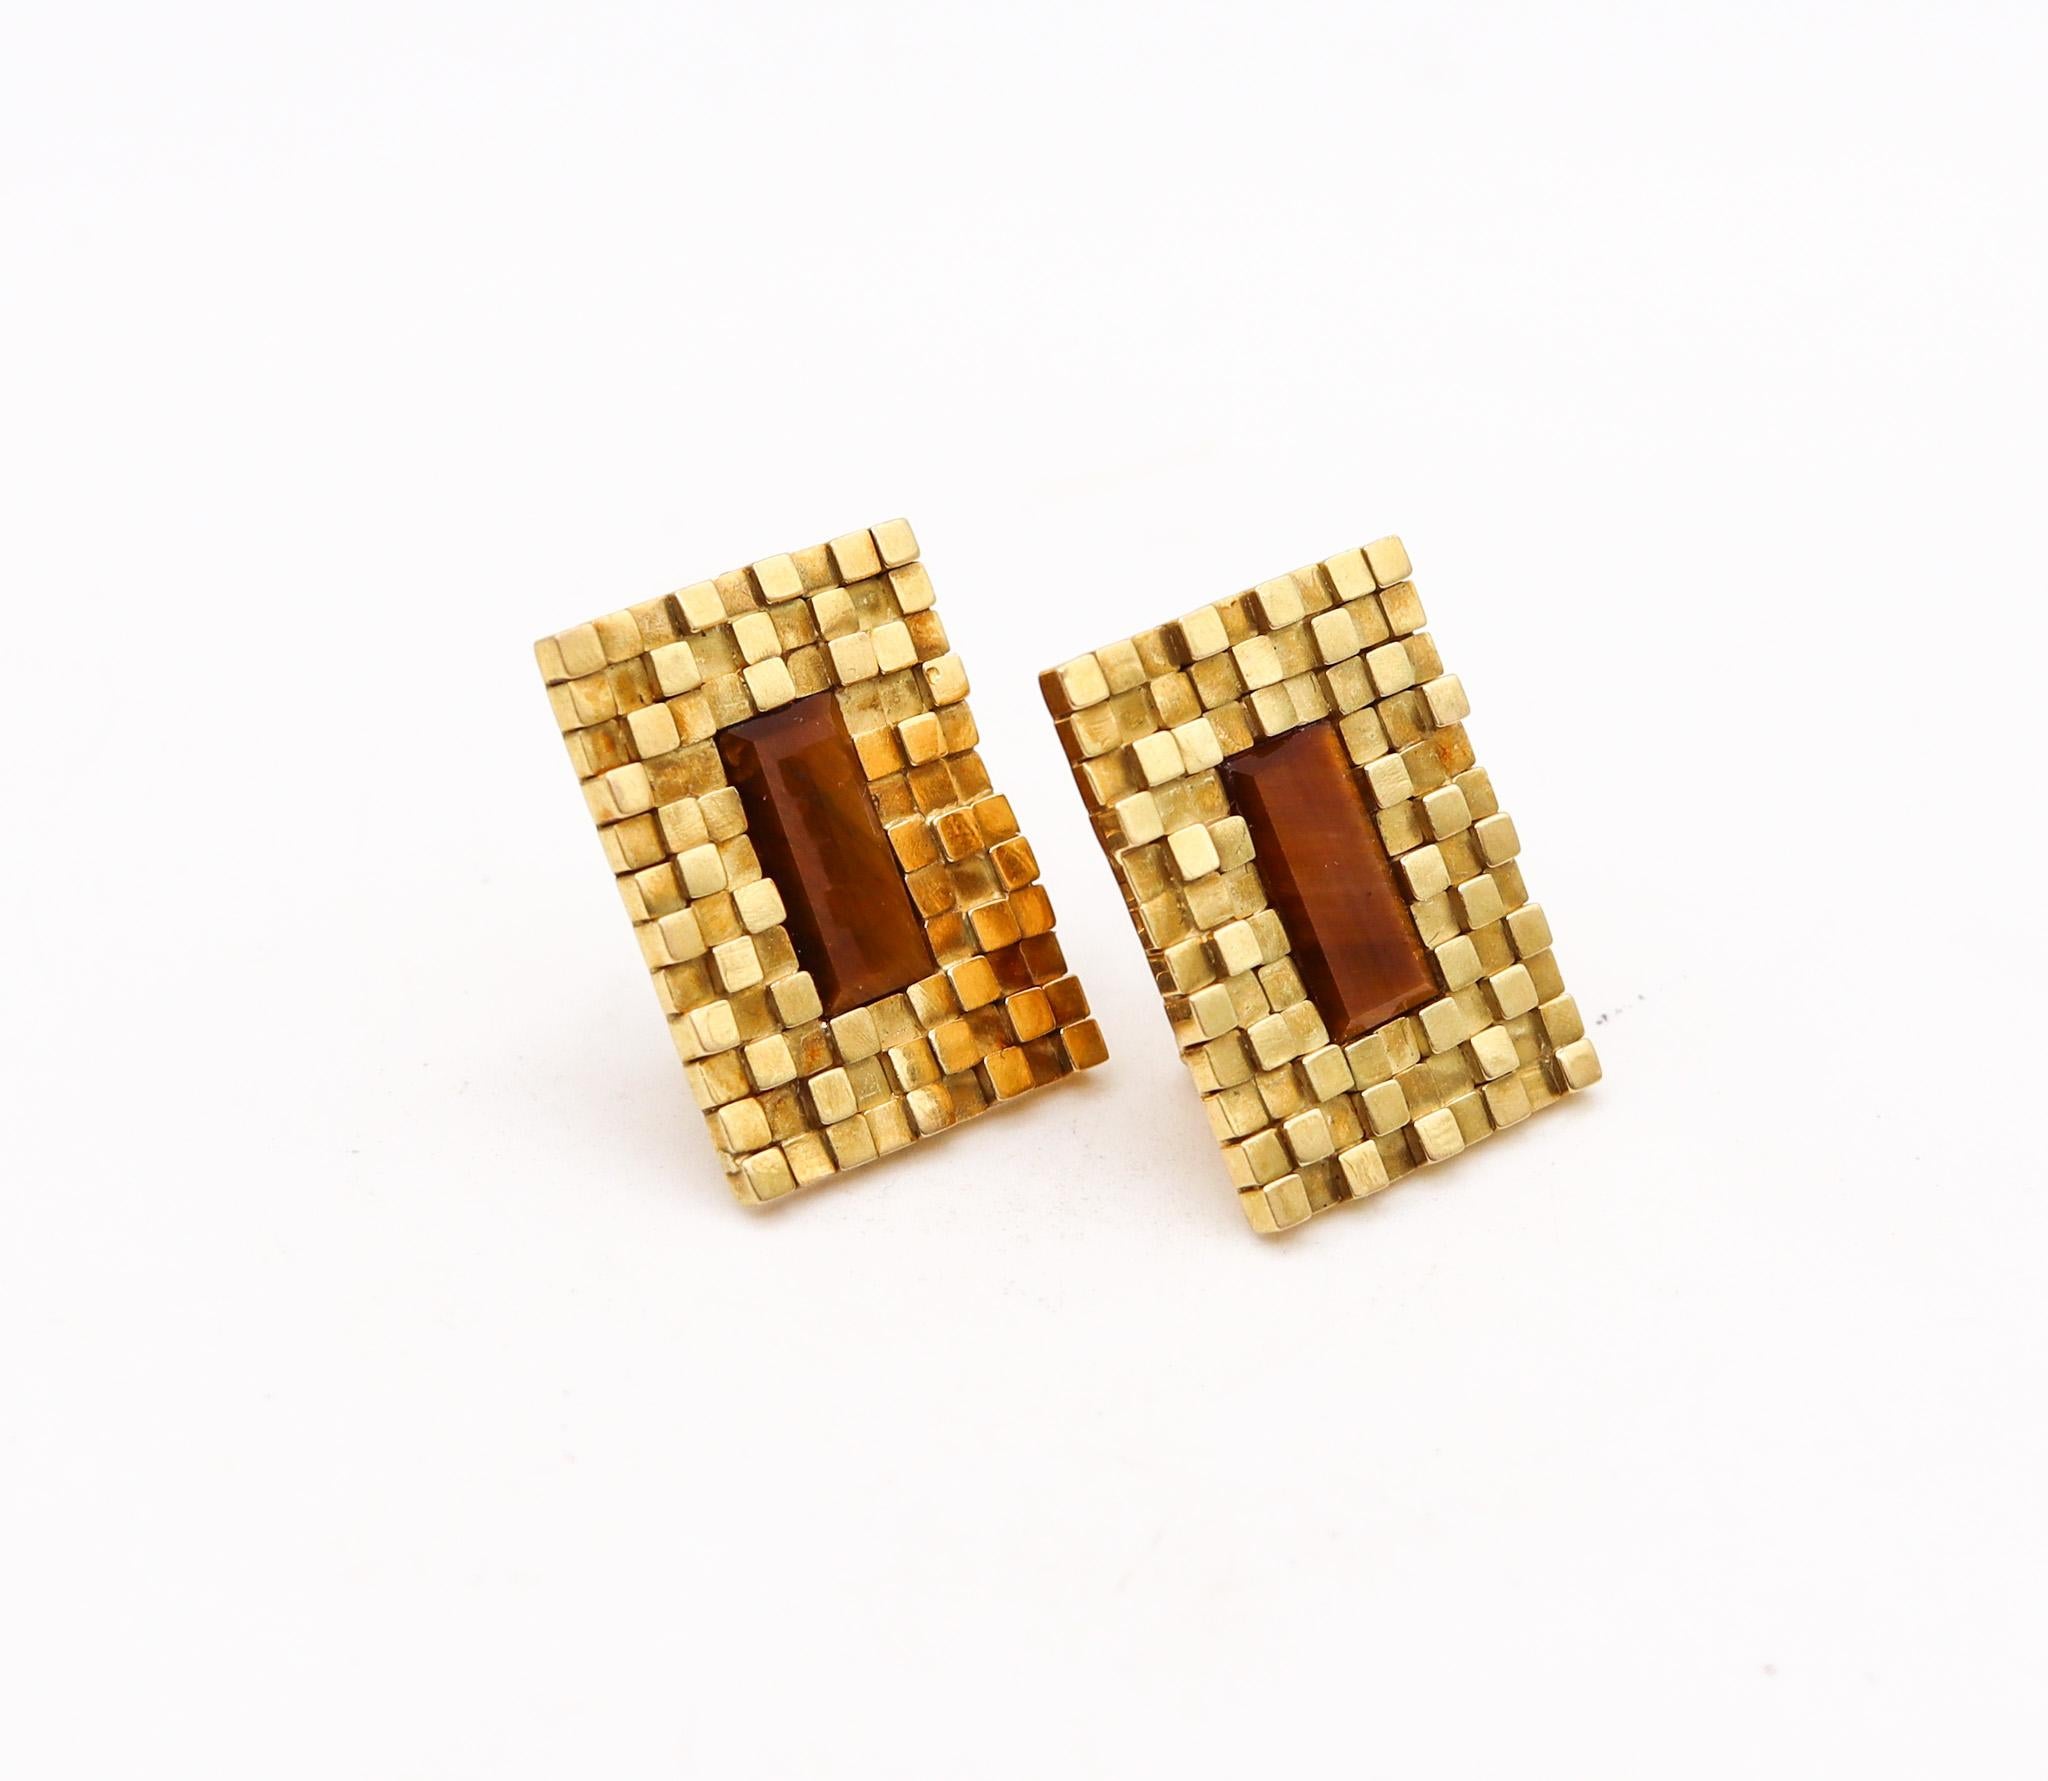 Modernist earrings designed by Spritzer & Furhmann.

Stunning sculptural pair of clips earrings, created for the jewelers and retailers Spritzer & Furhmann, back in the late 1960. This pair has been crafted with modernist geometric patterns,